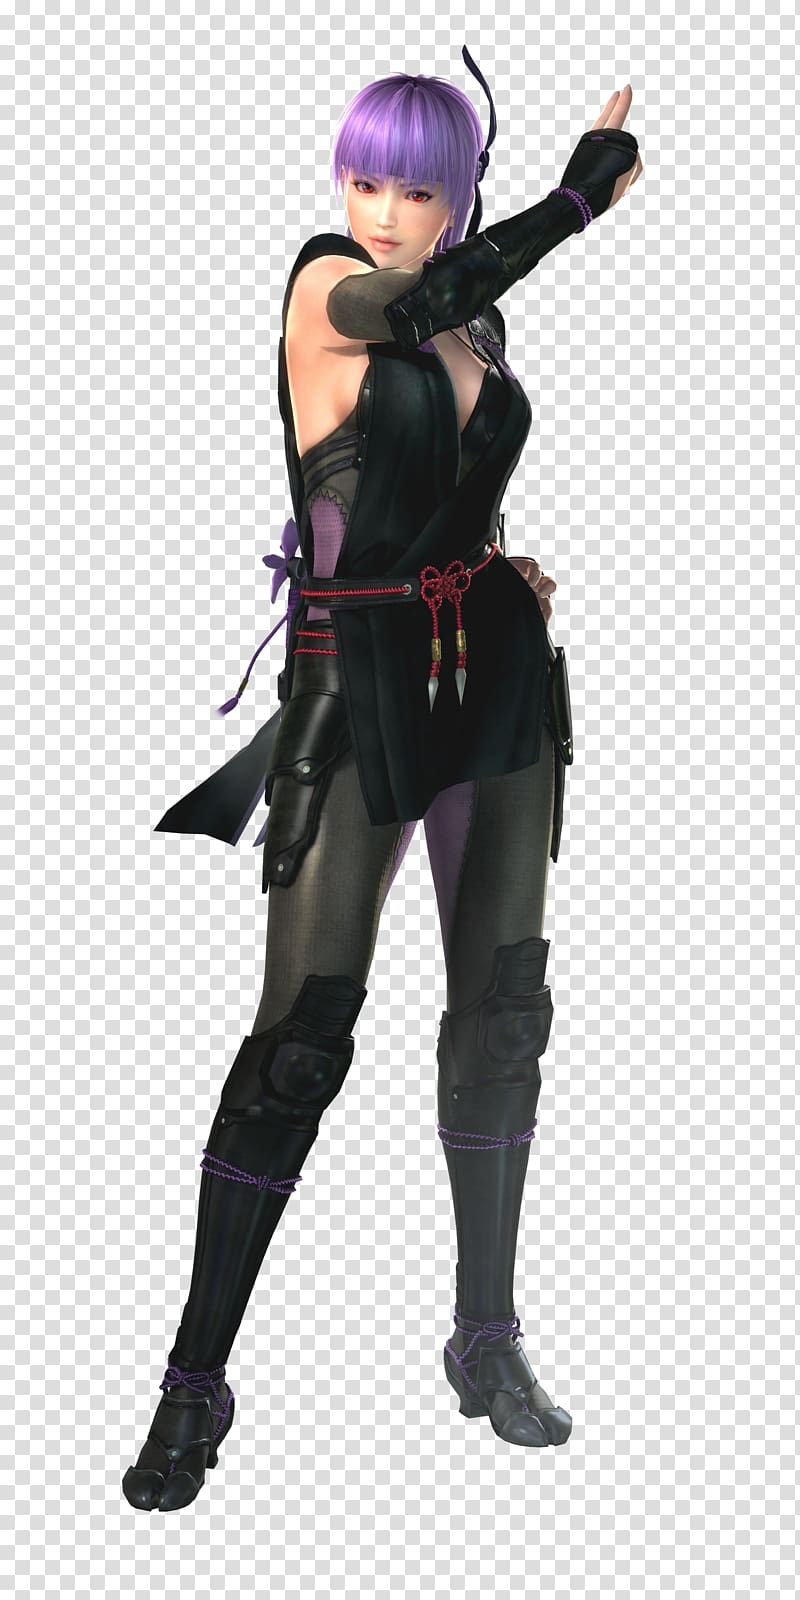 Dead or Alive 5 Last Round Ayane Ninja Gaiden 3, others transparent background PNG clipart